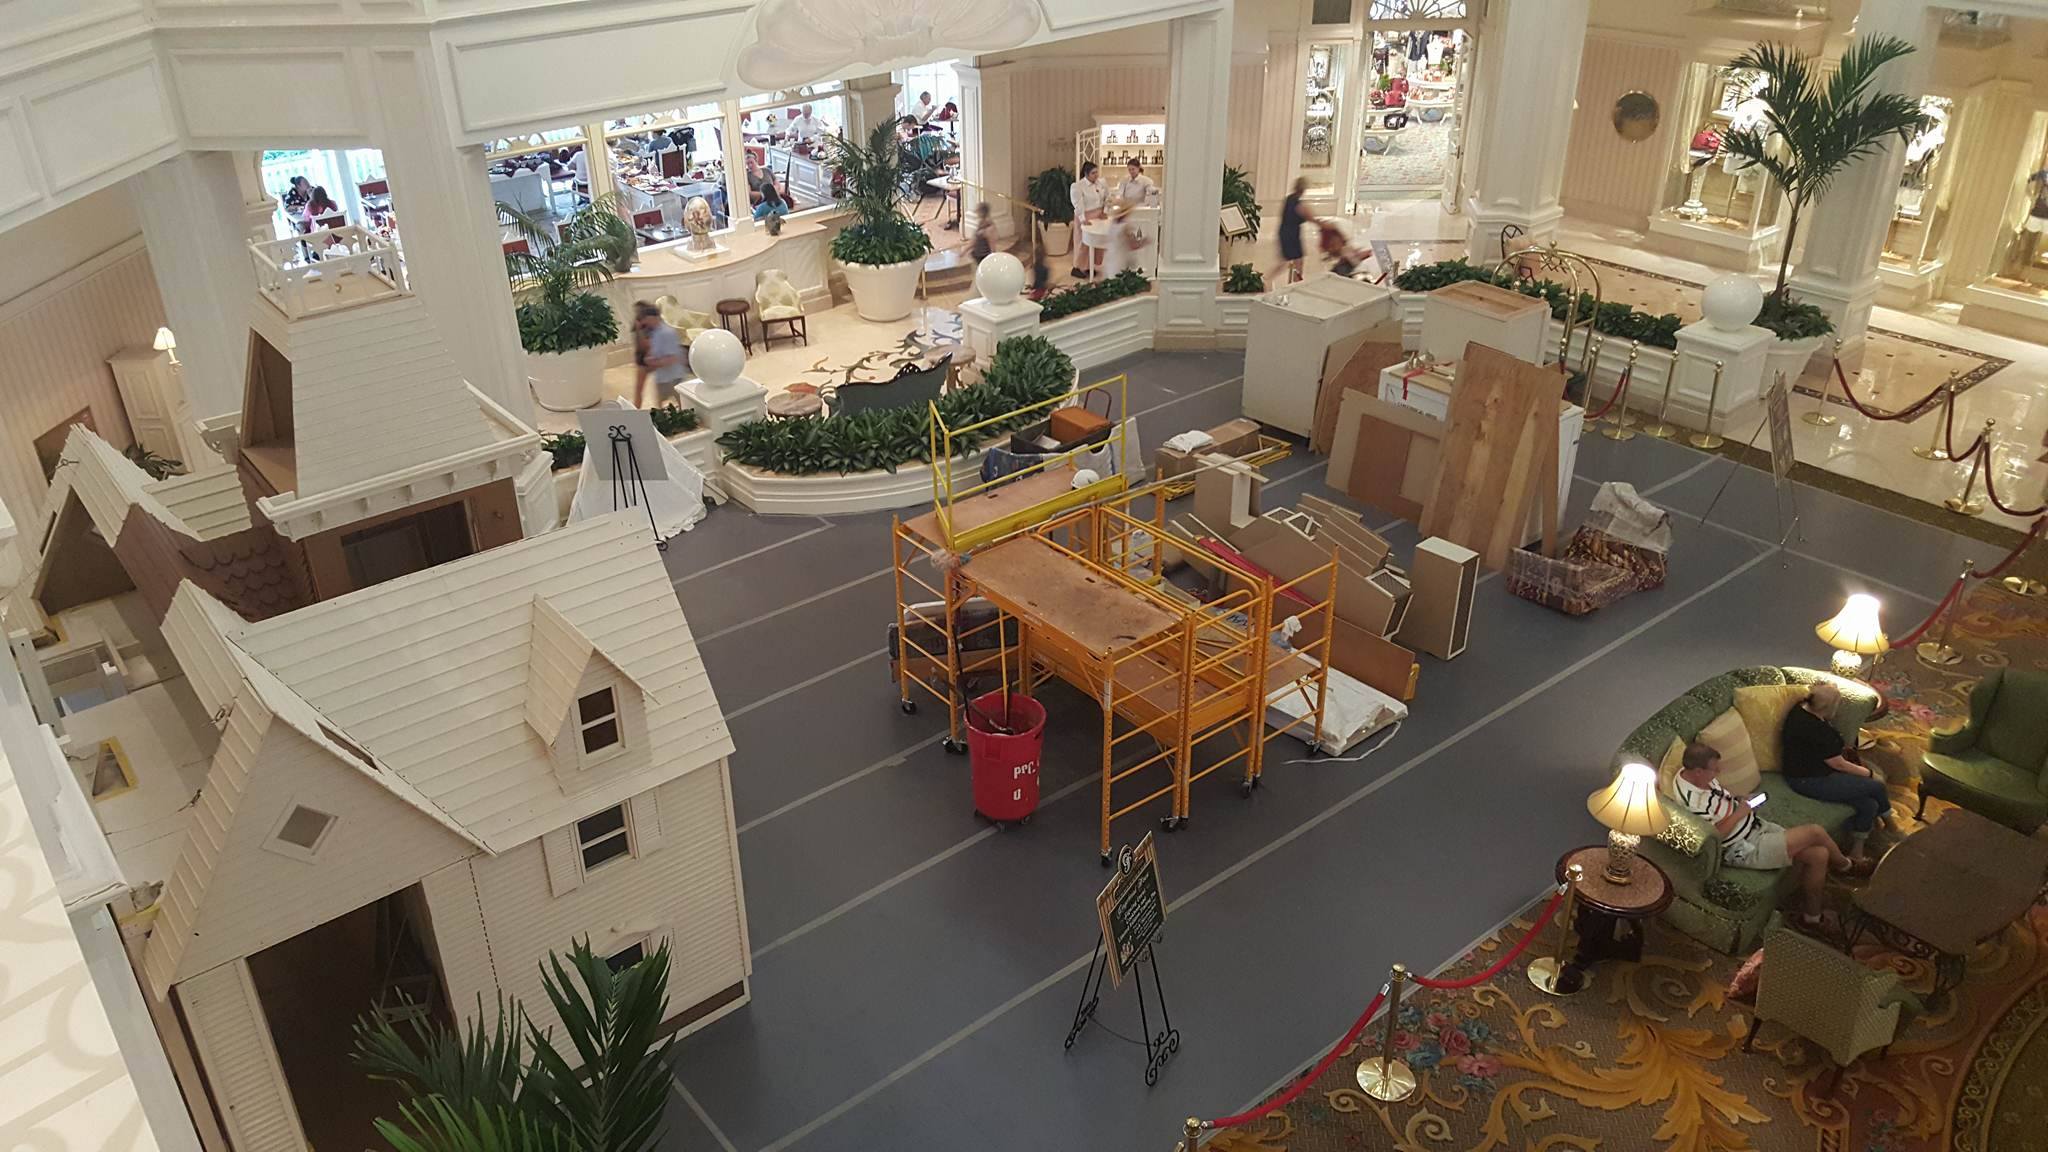 Construction has begun on The Gingerbread House at Disney’s Grand Floridian Resort